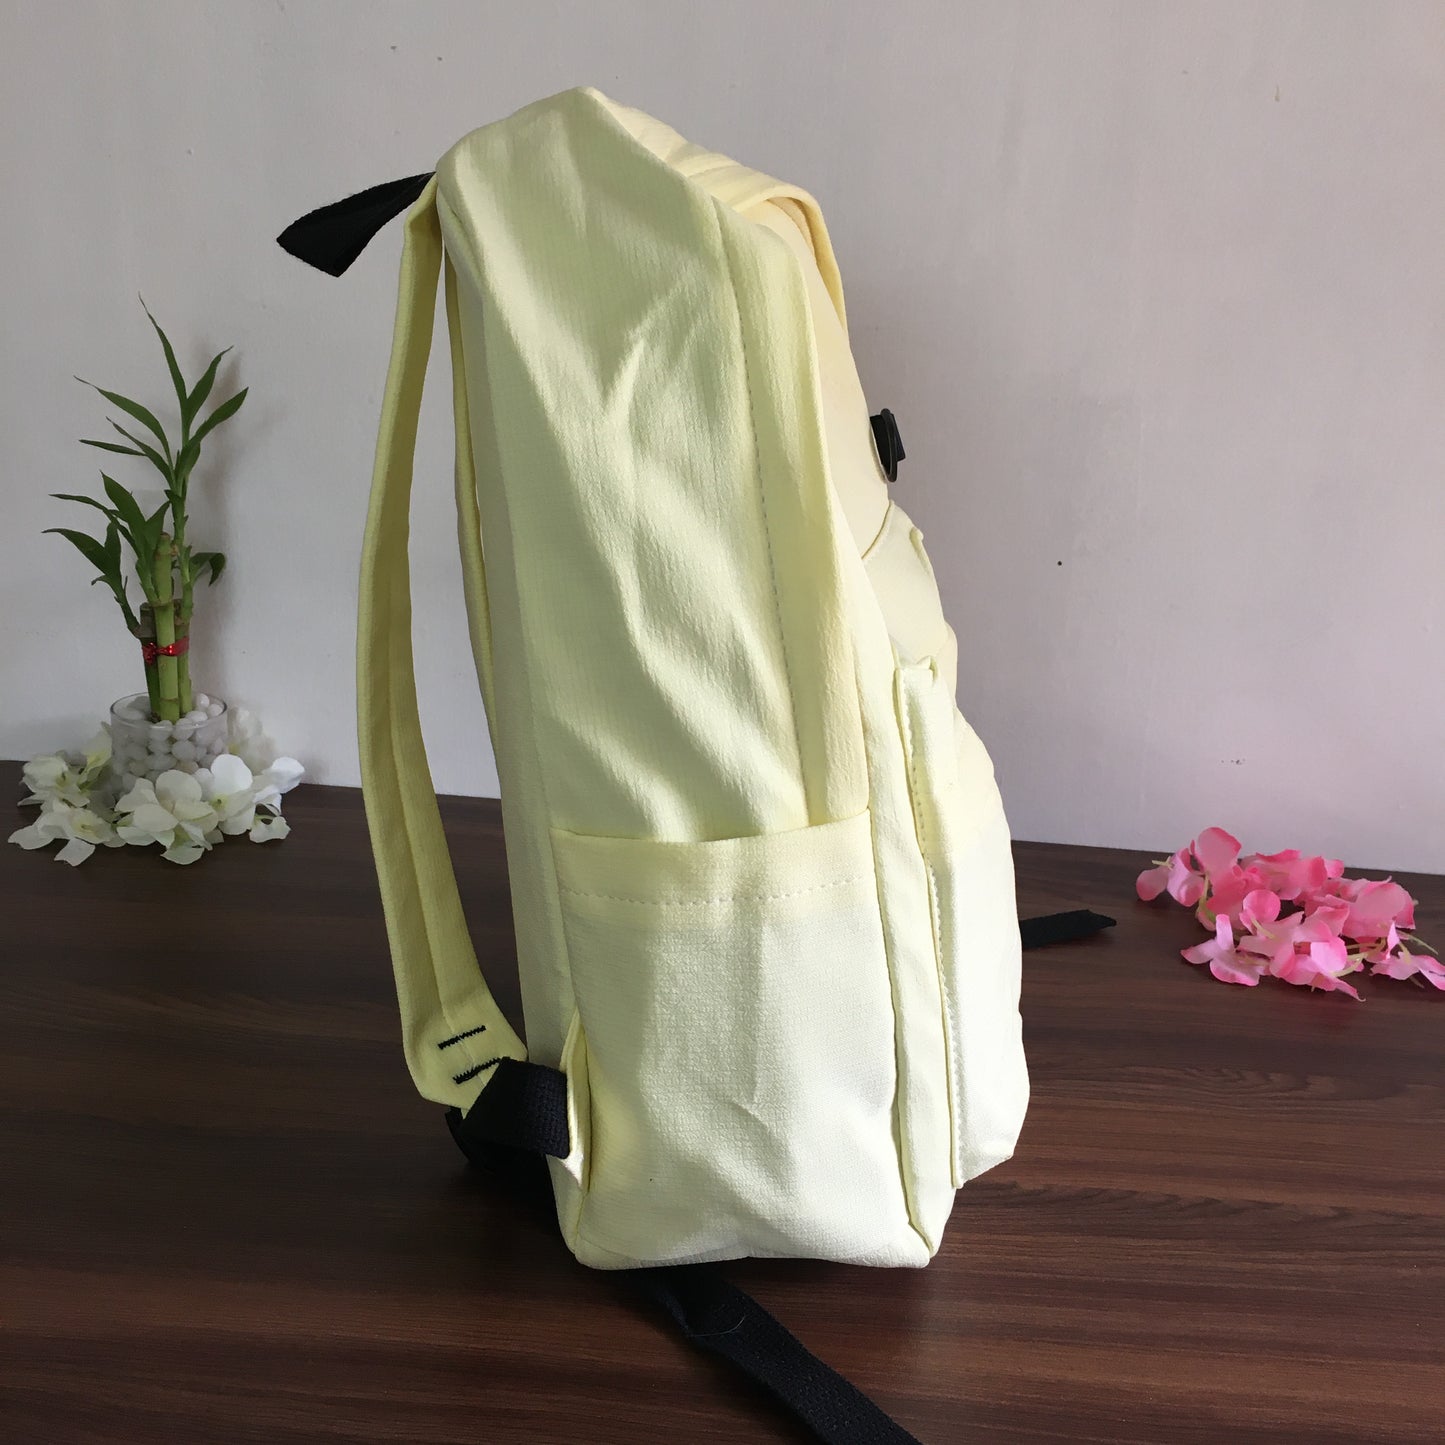 High Quality Korean Style Backpacks D no - 86 - Small Size